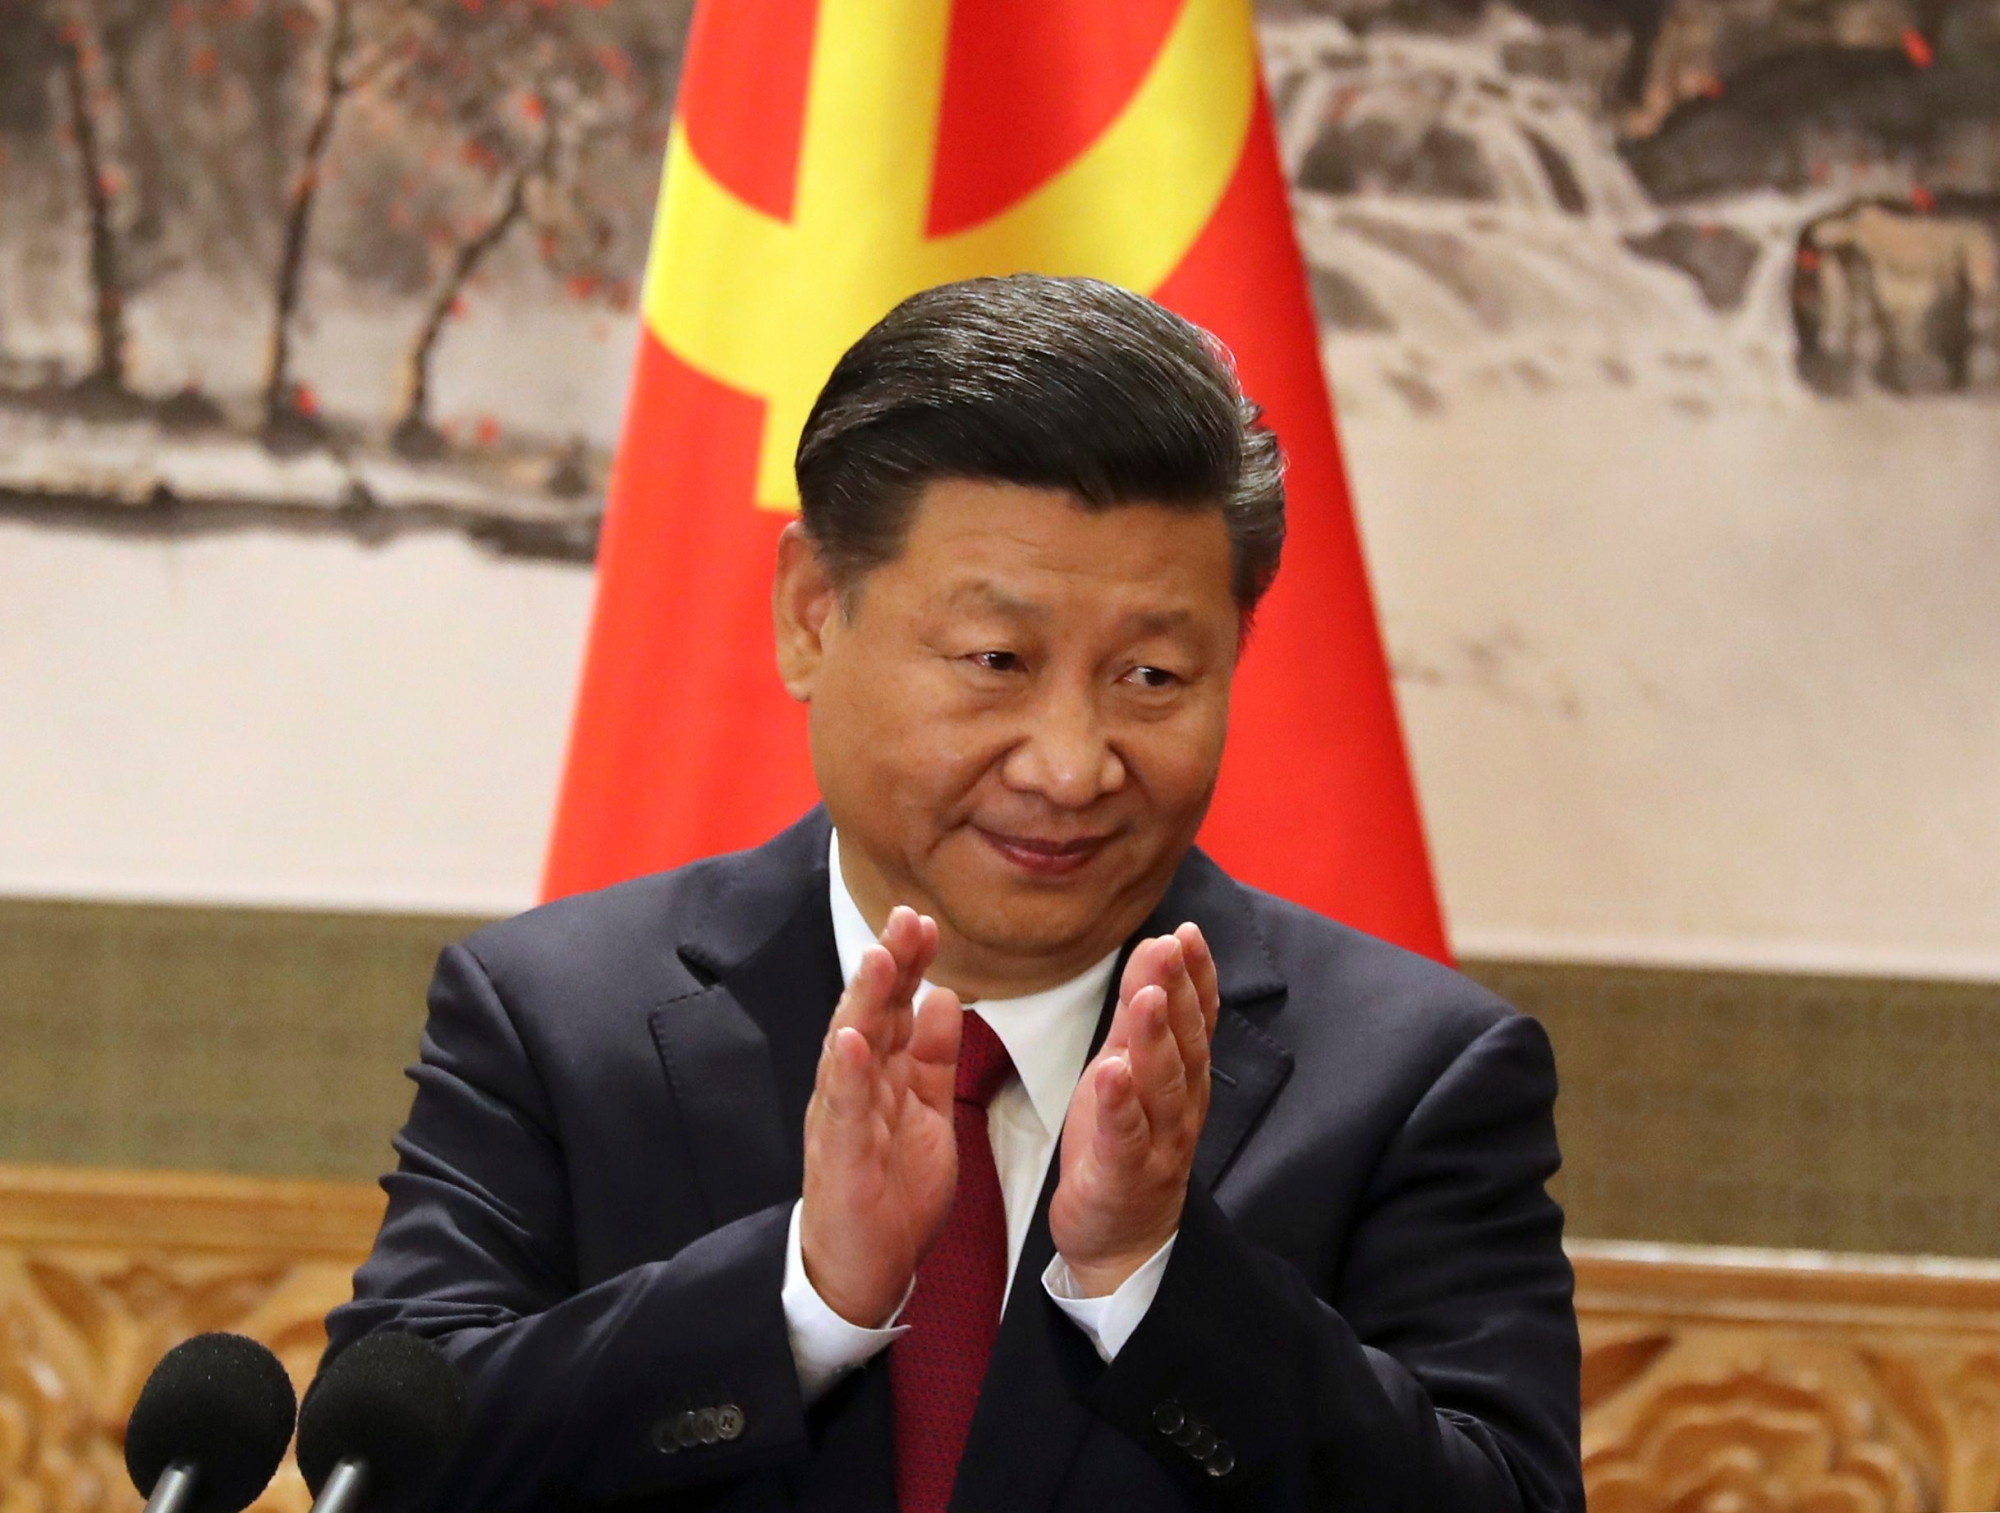 FILE - In this Oct 25, 2017, file photo, Chinese President Xi Jinping claps while addressing the media as he introduces new members of the Politburo Standing Committee at Beijing's Great Hall of the People. On a proposal made public Sunday, Feb. 25, 2018, China's ruling Communist Party proposes removing a limit of two consecutive terms for the president and vice president. (AP Photo/Ng Han Guan, File) China Politics